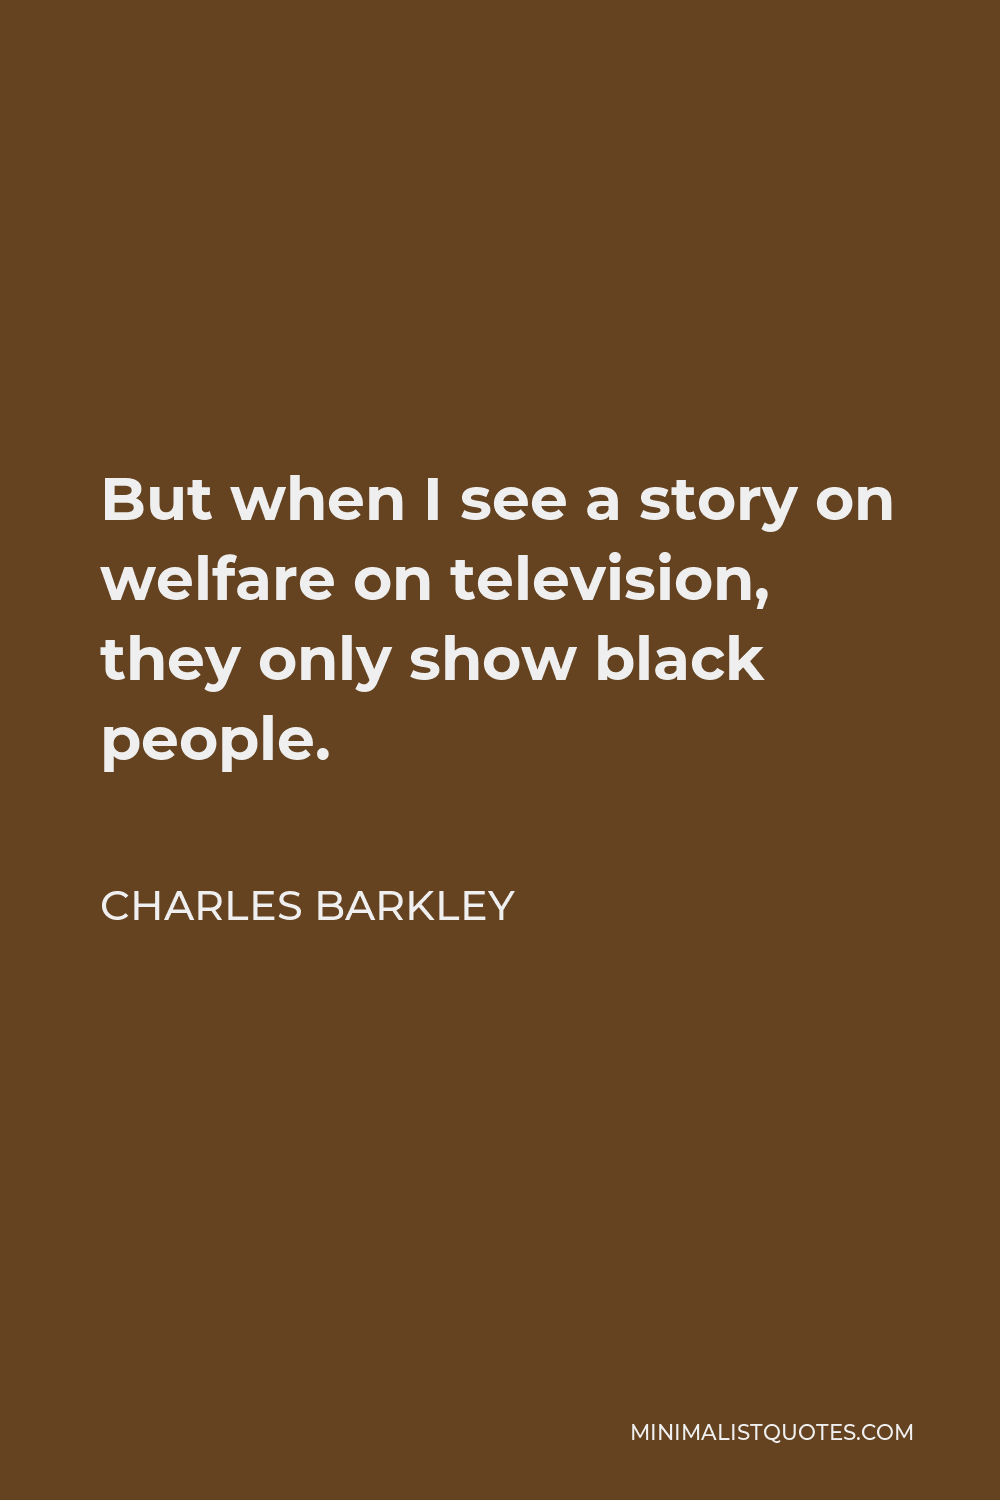 Charles Barkley Quote - But when I see a story on welfare on television, they only show black people.